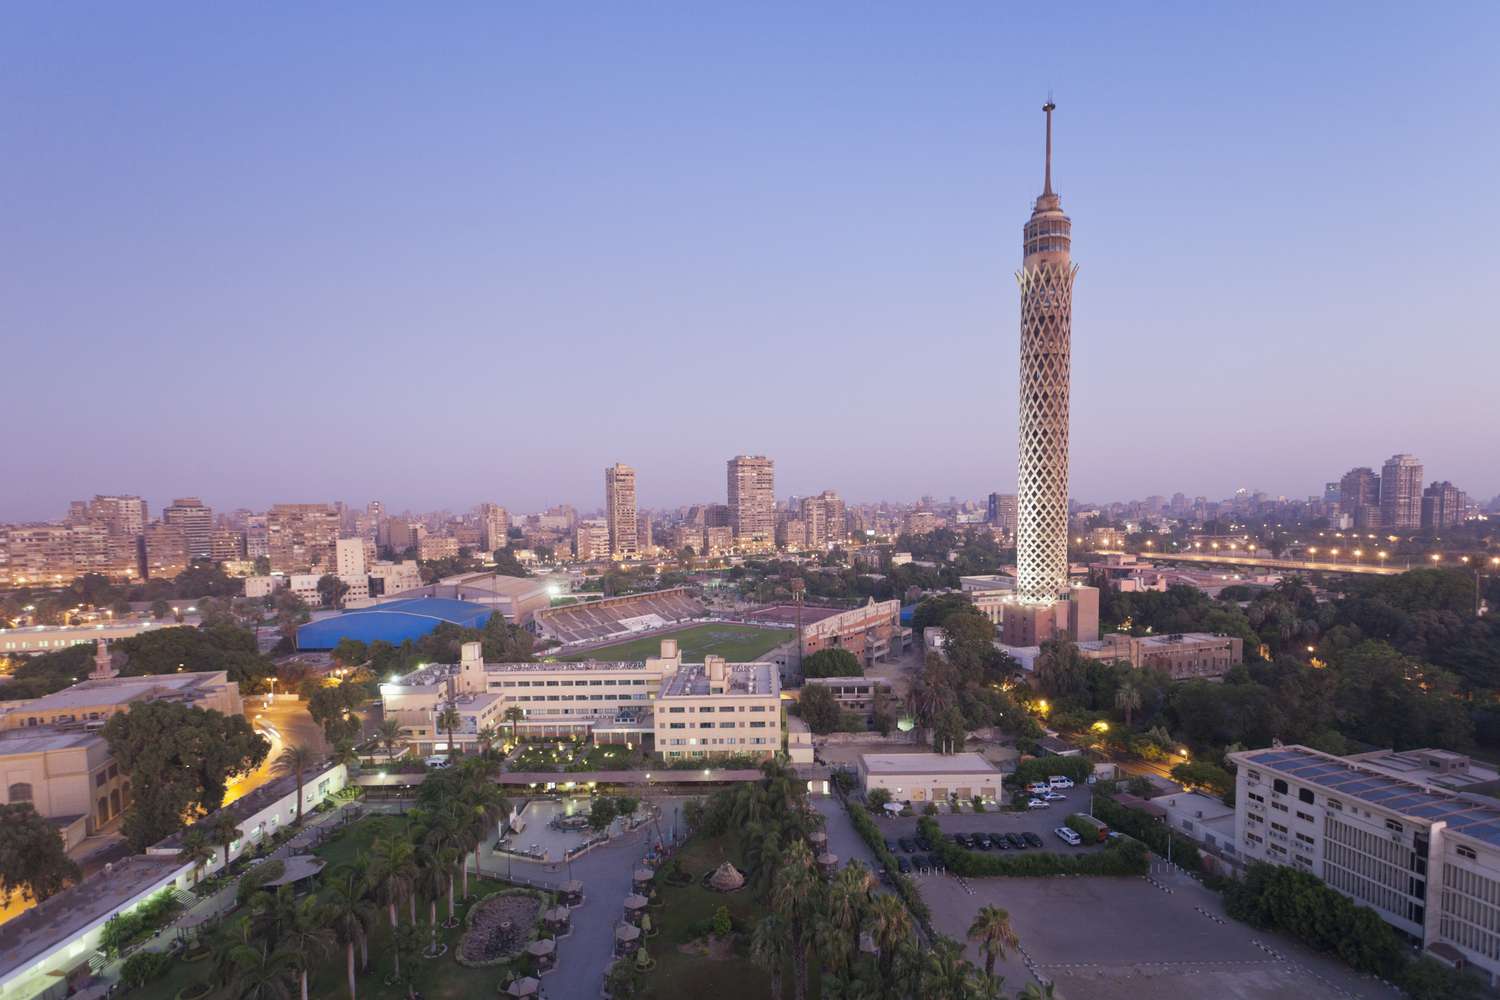 Cairo: 15 Interesting Facts You Might Not Know